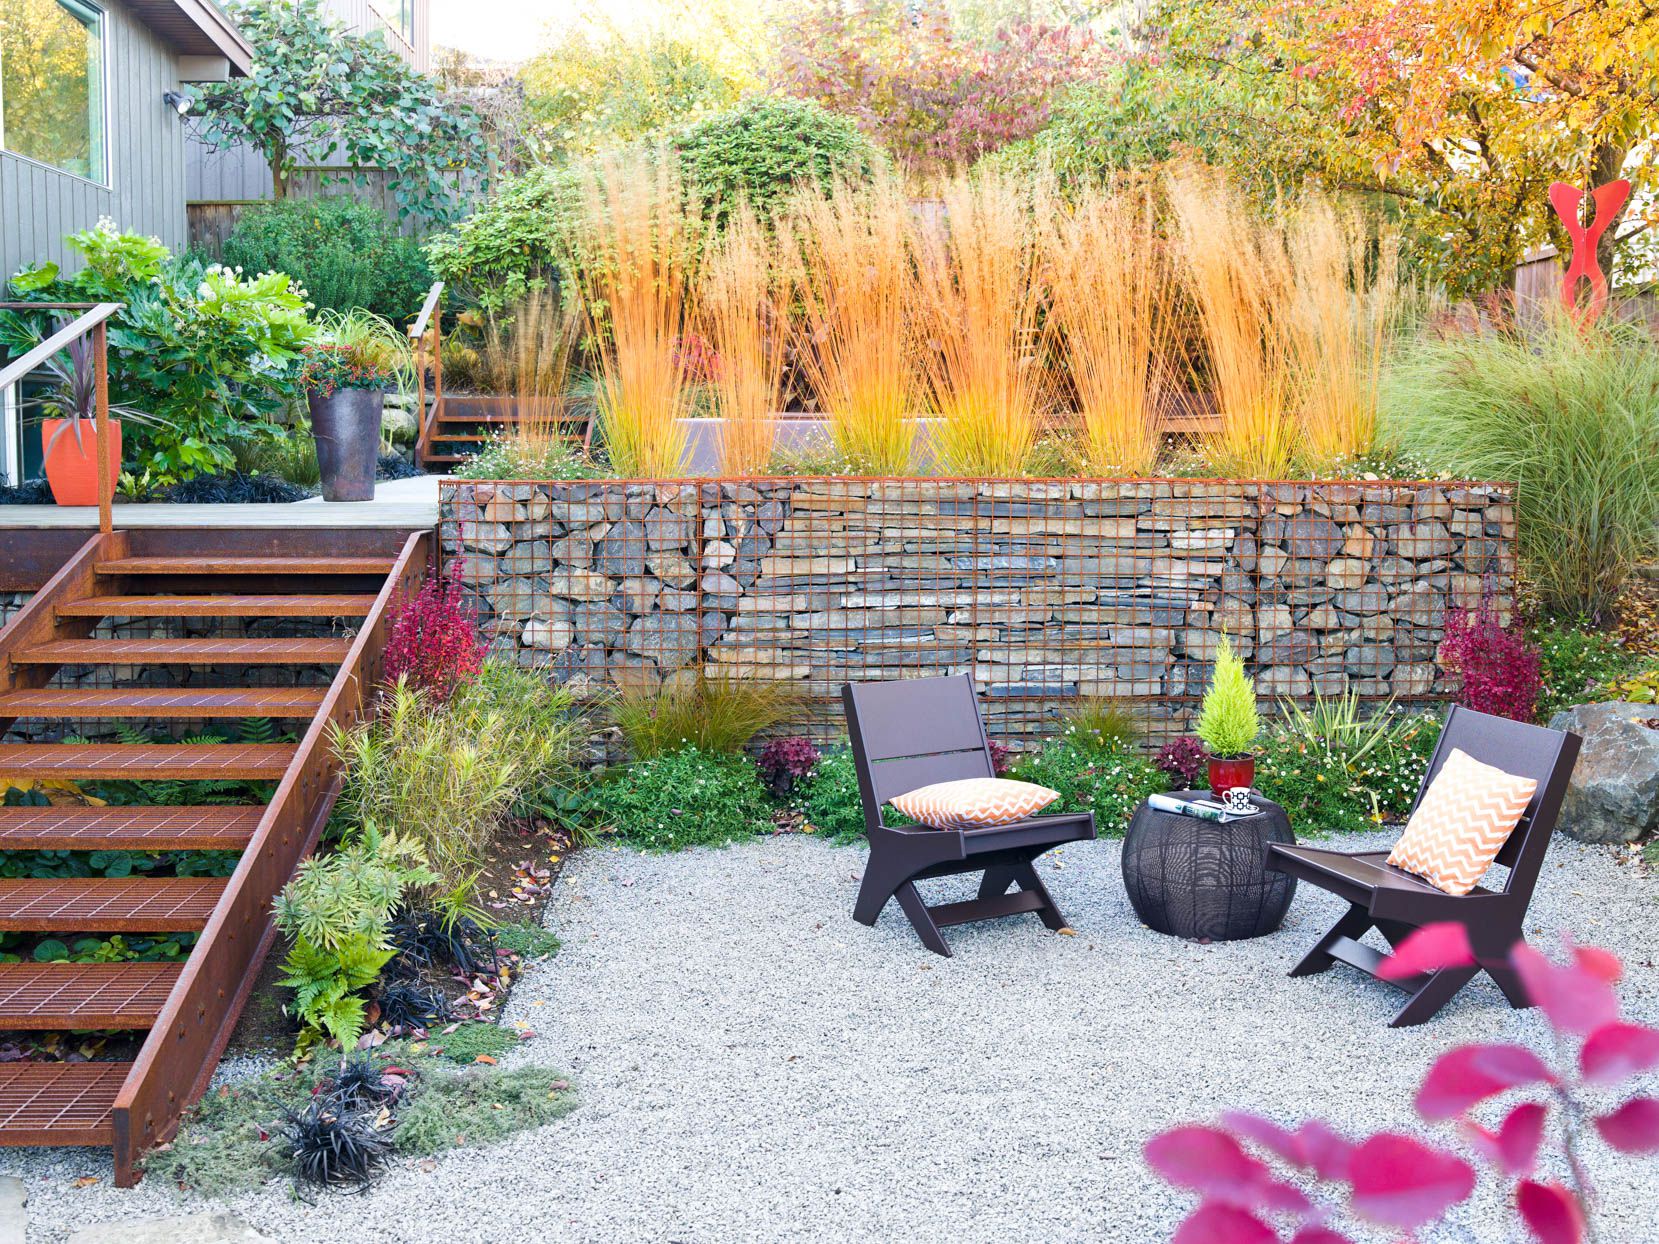 Creating Outdoor Living Spaces Enhancing Californian Homes with Style and Functionality 2